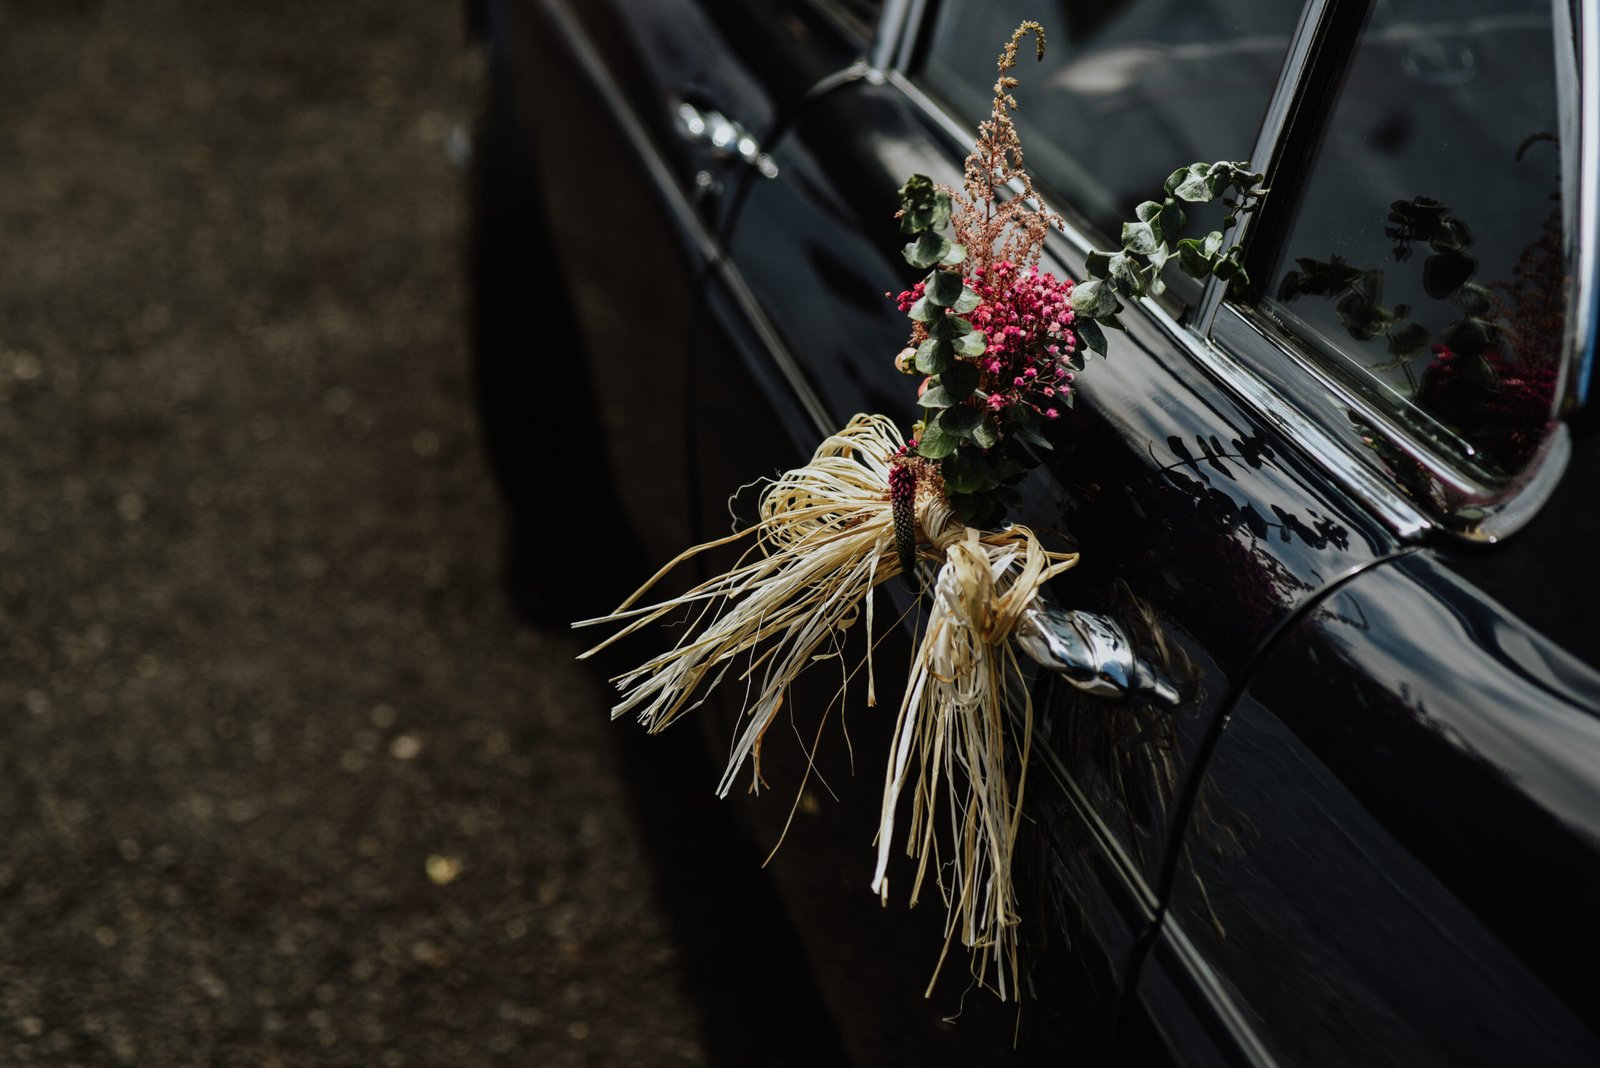 Bouquet of flowers decoration for the official car of the bride and groom on the wedding day